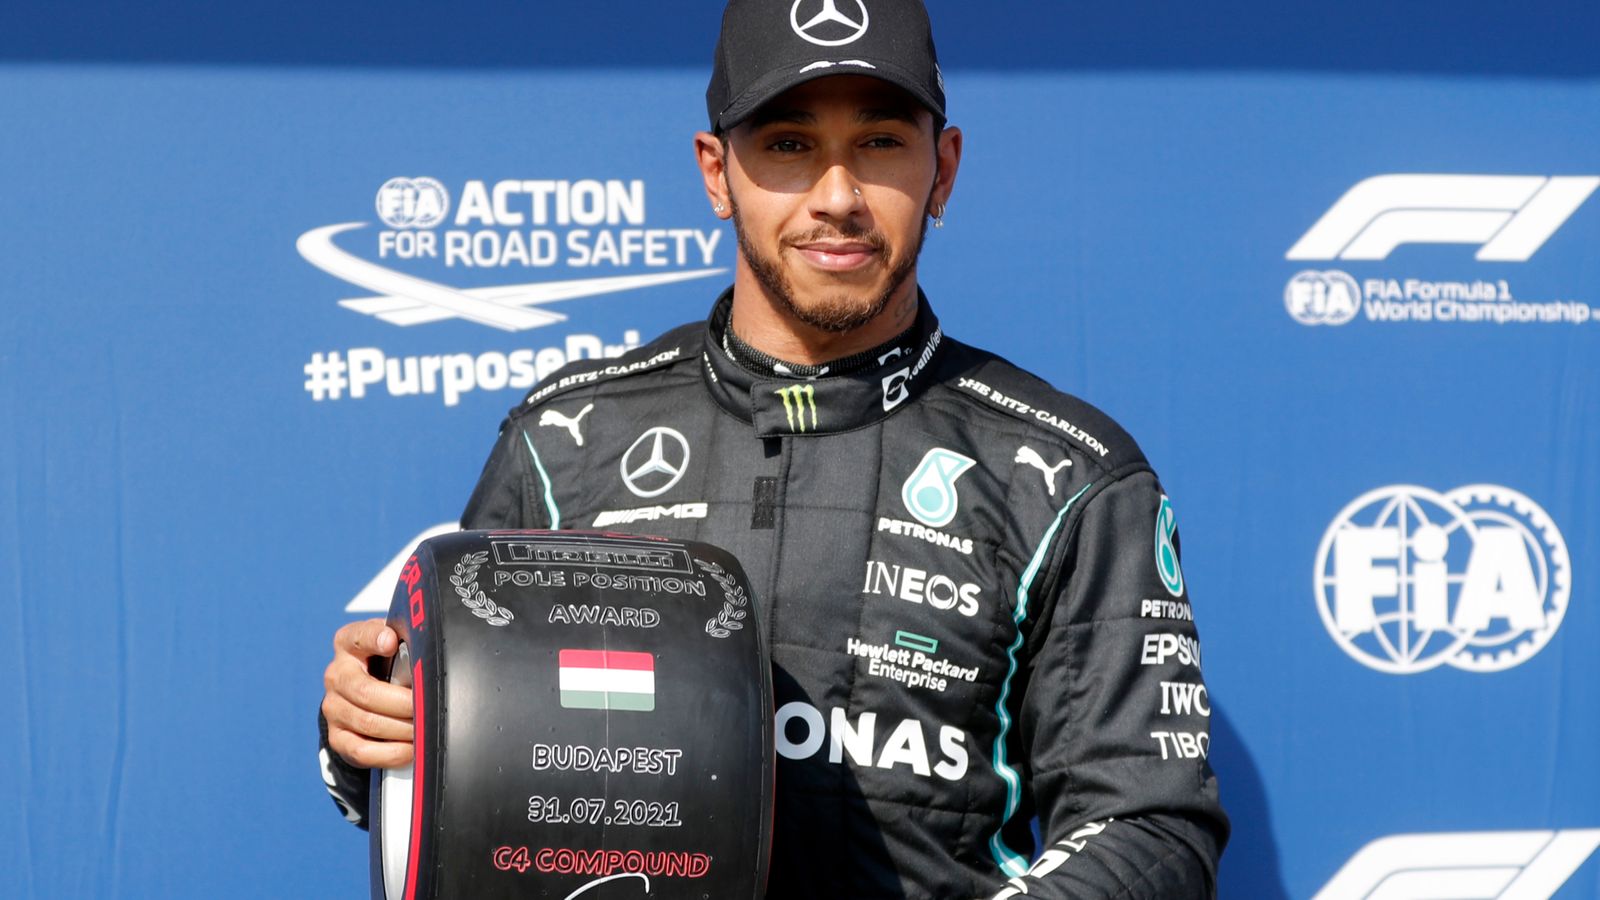 Lewis Hamilton shrugs off boos at Hungarian GP after claiming pole position in first race since Silverstone controversy